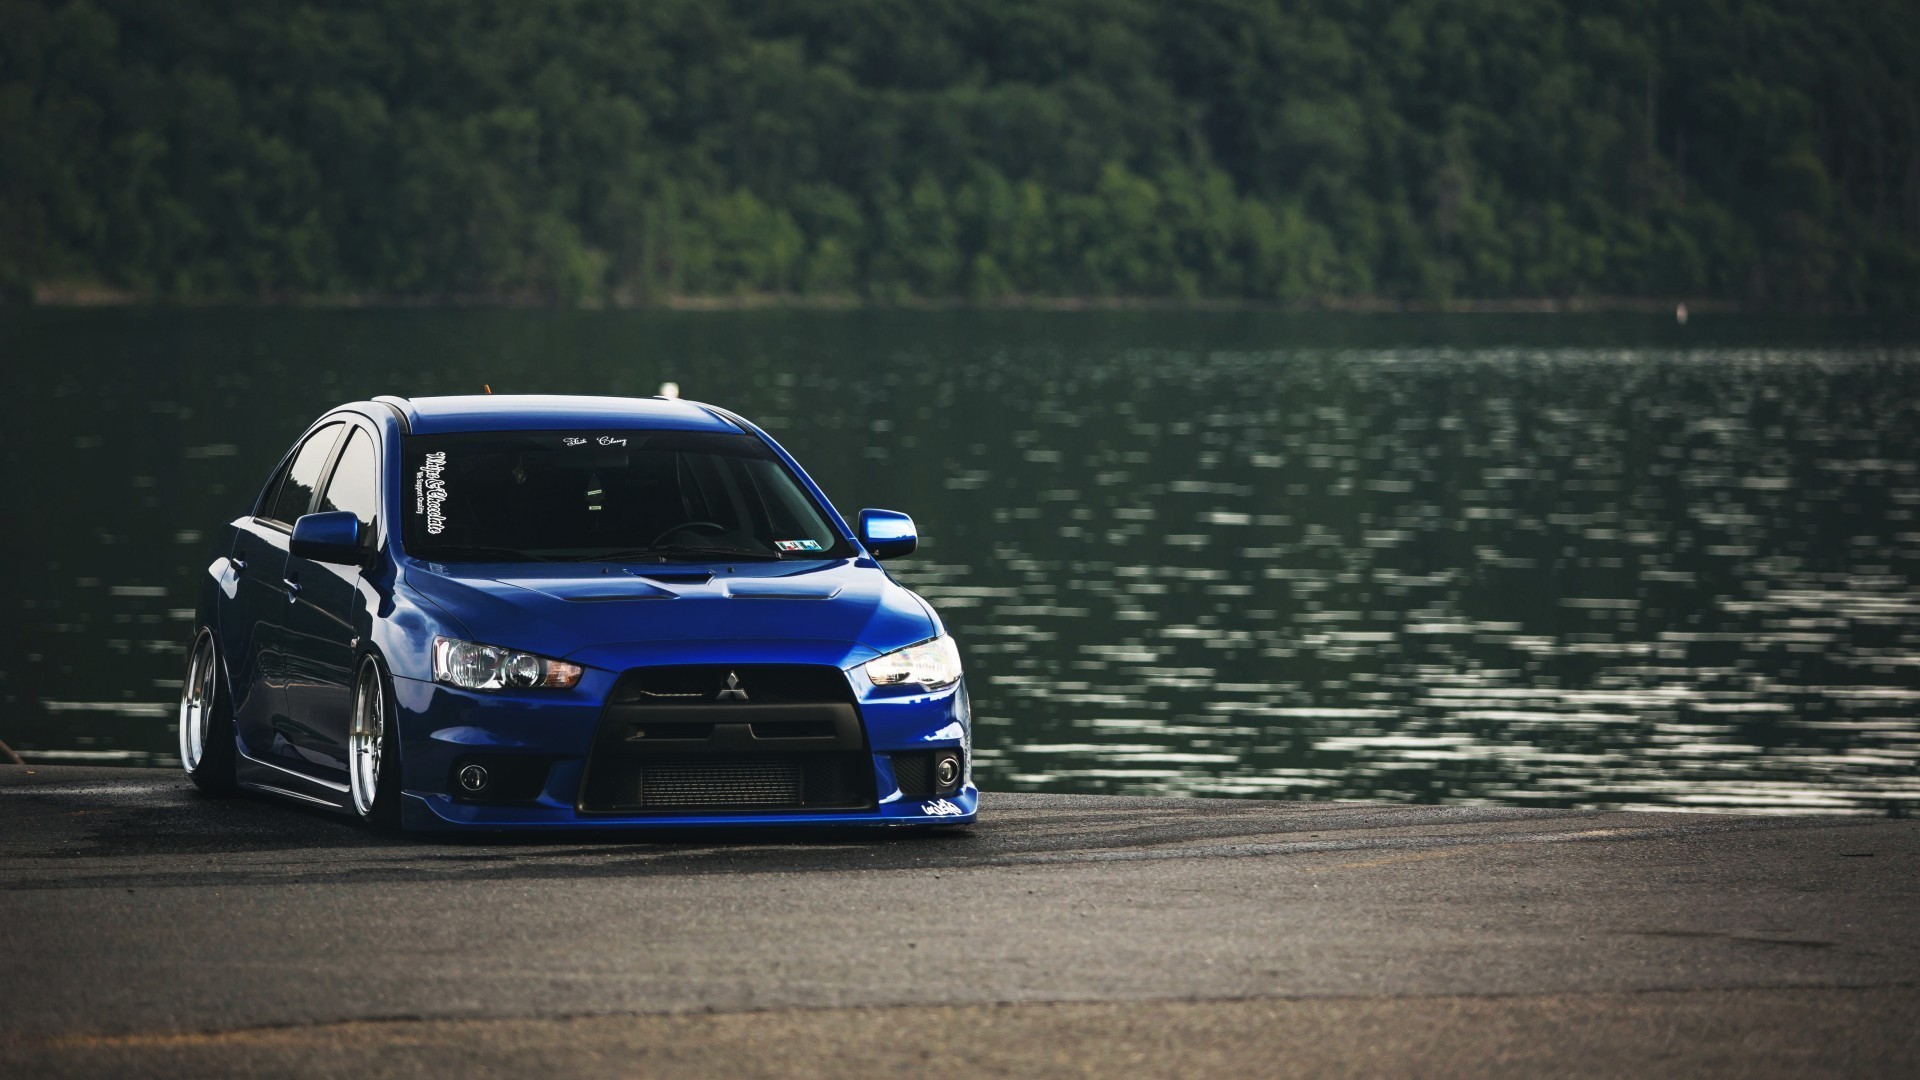 1920x1080 Explore Wallpaper For Iphone, Evo X, and more!